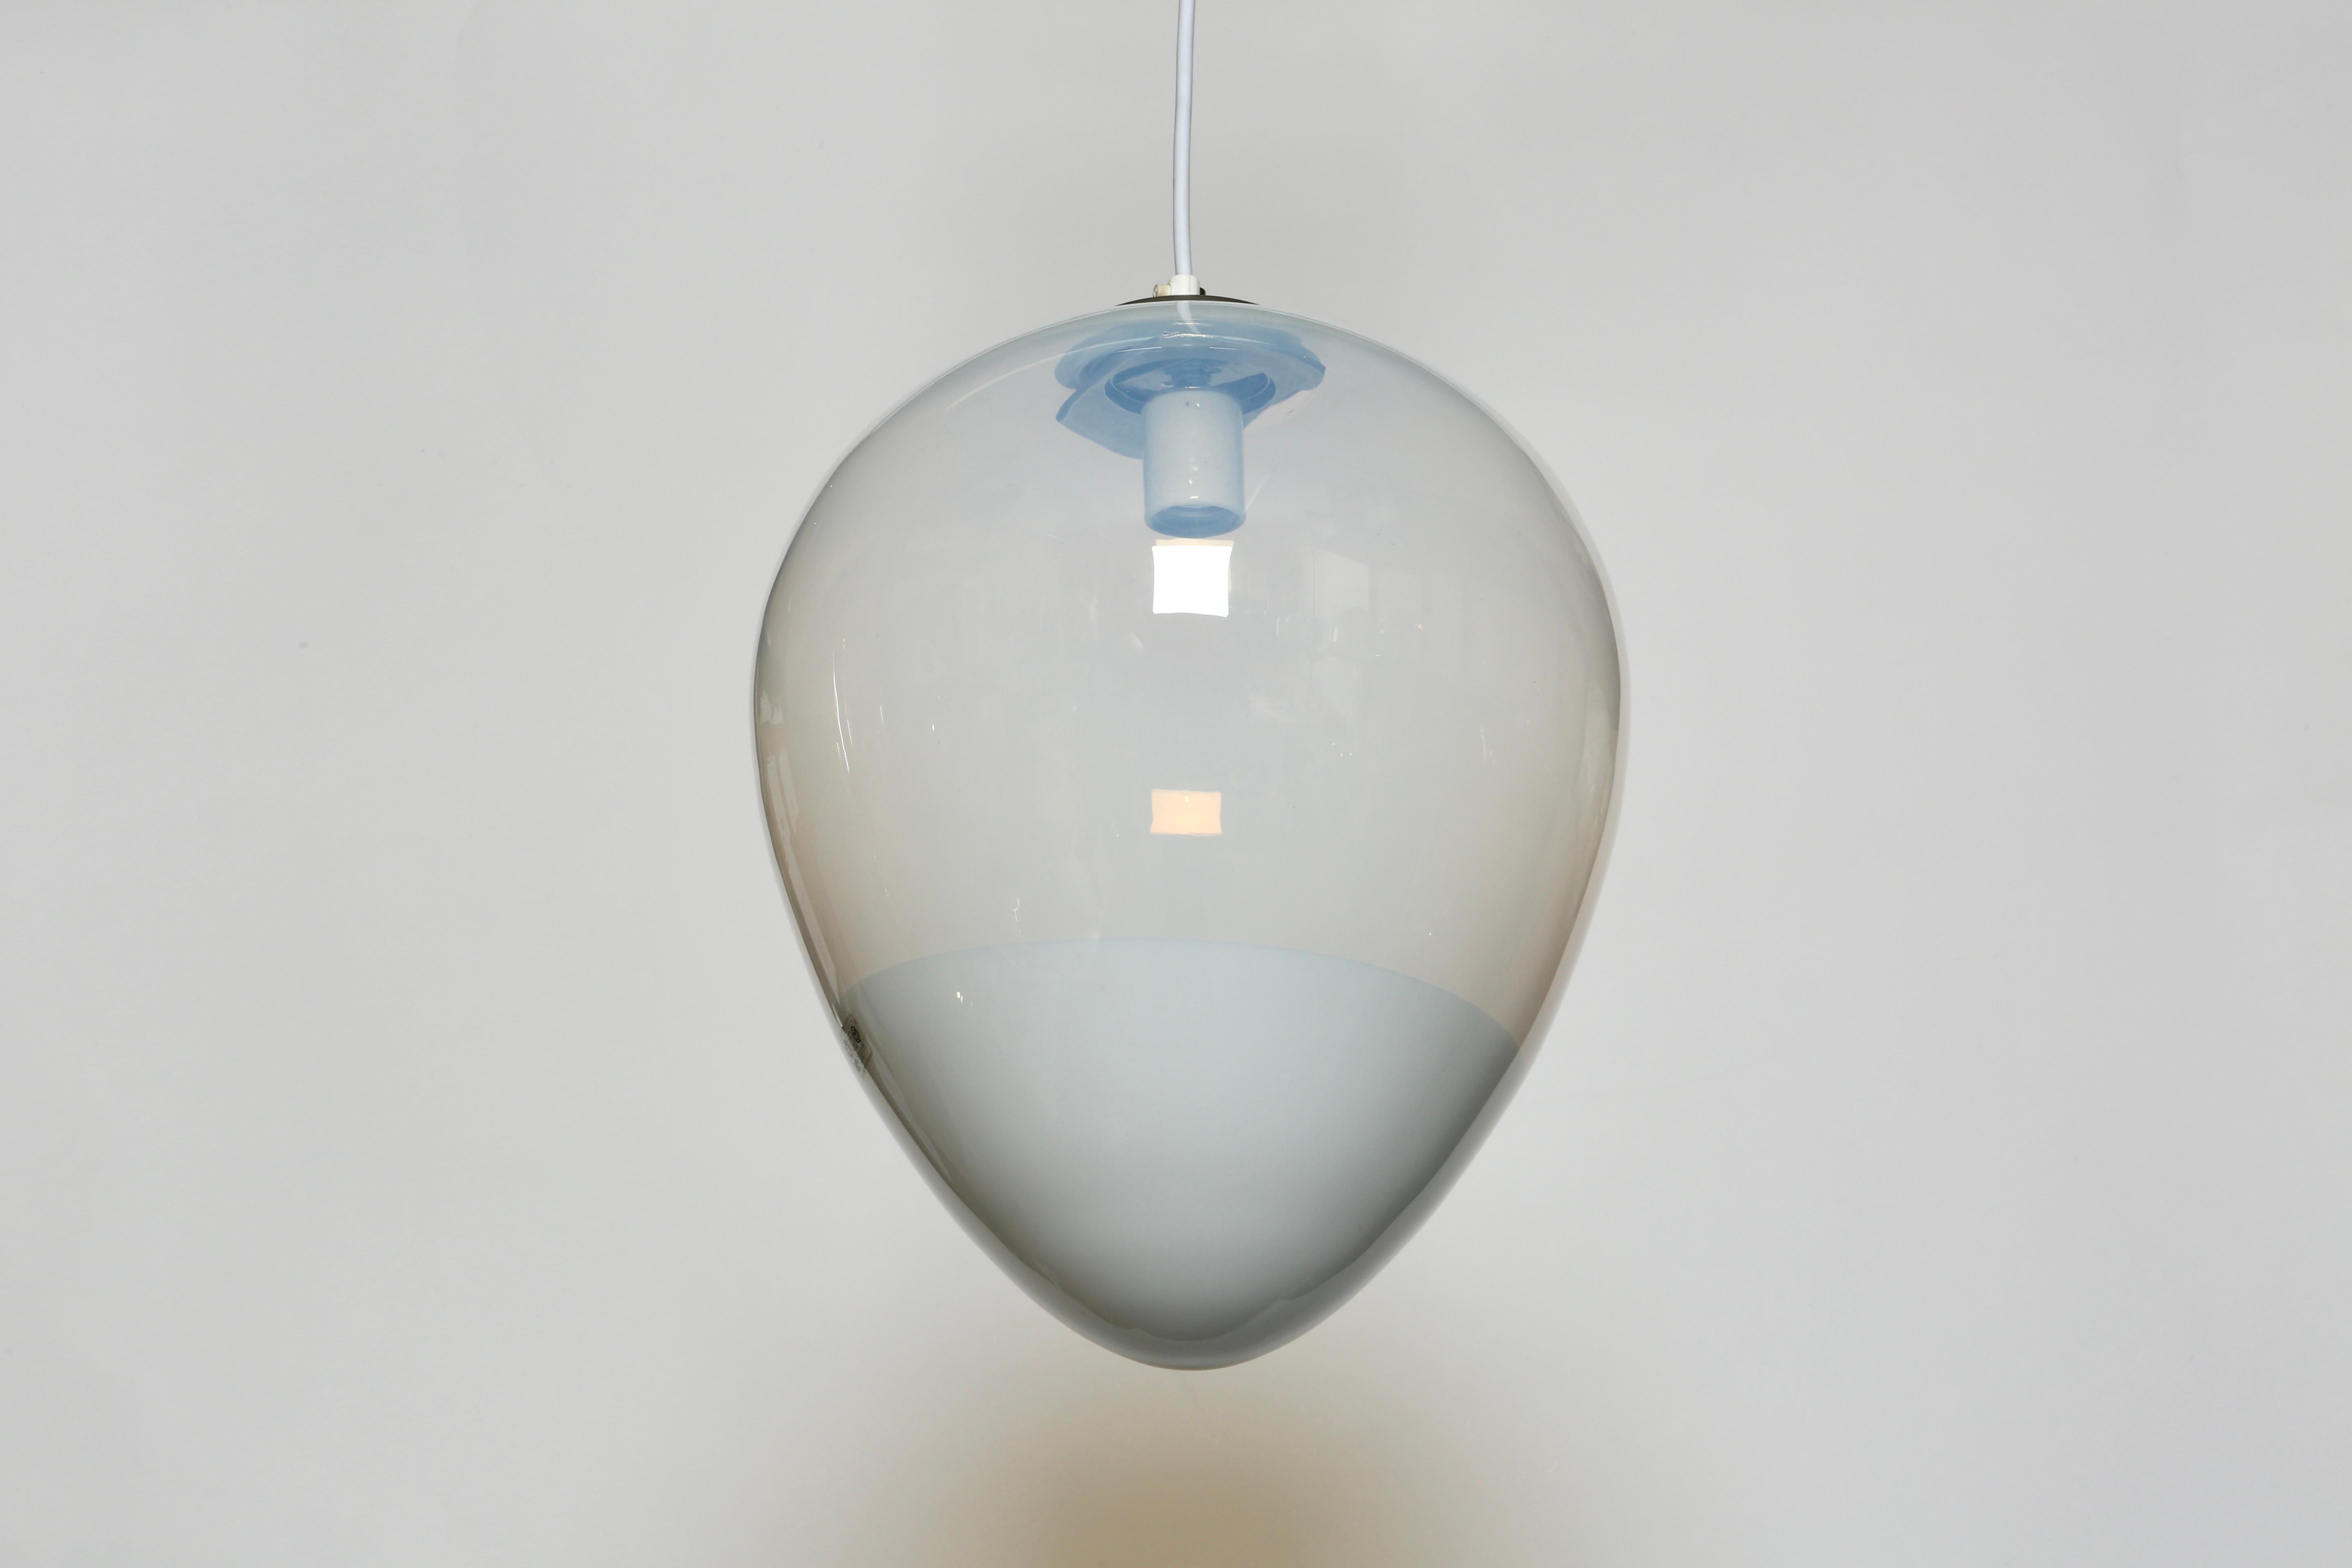 Murano glass ceiling pendant by Leucos.
Made in Italy in 1970s.
Handblown glass.
Rewired for US.
Takes one medium base bulb.
Overall drop is adjustable, can be shorter.
1 ceiling pendant is available.
Price is for 1 pendant.

We take pride in